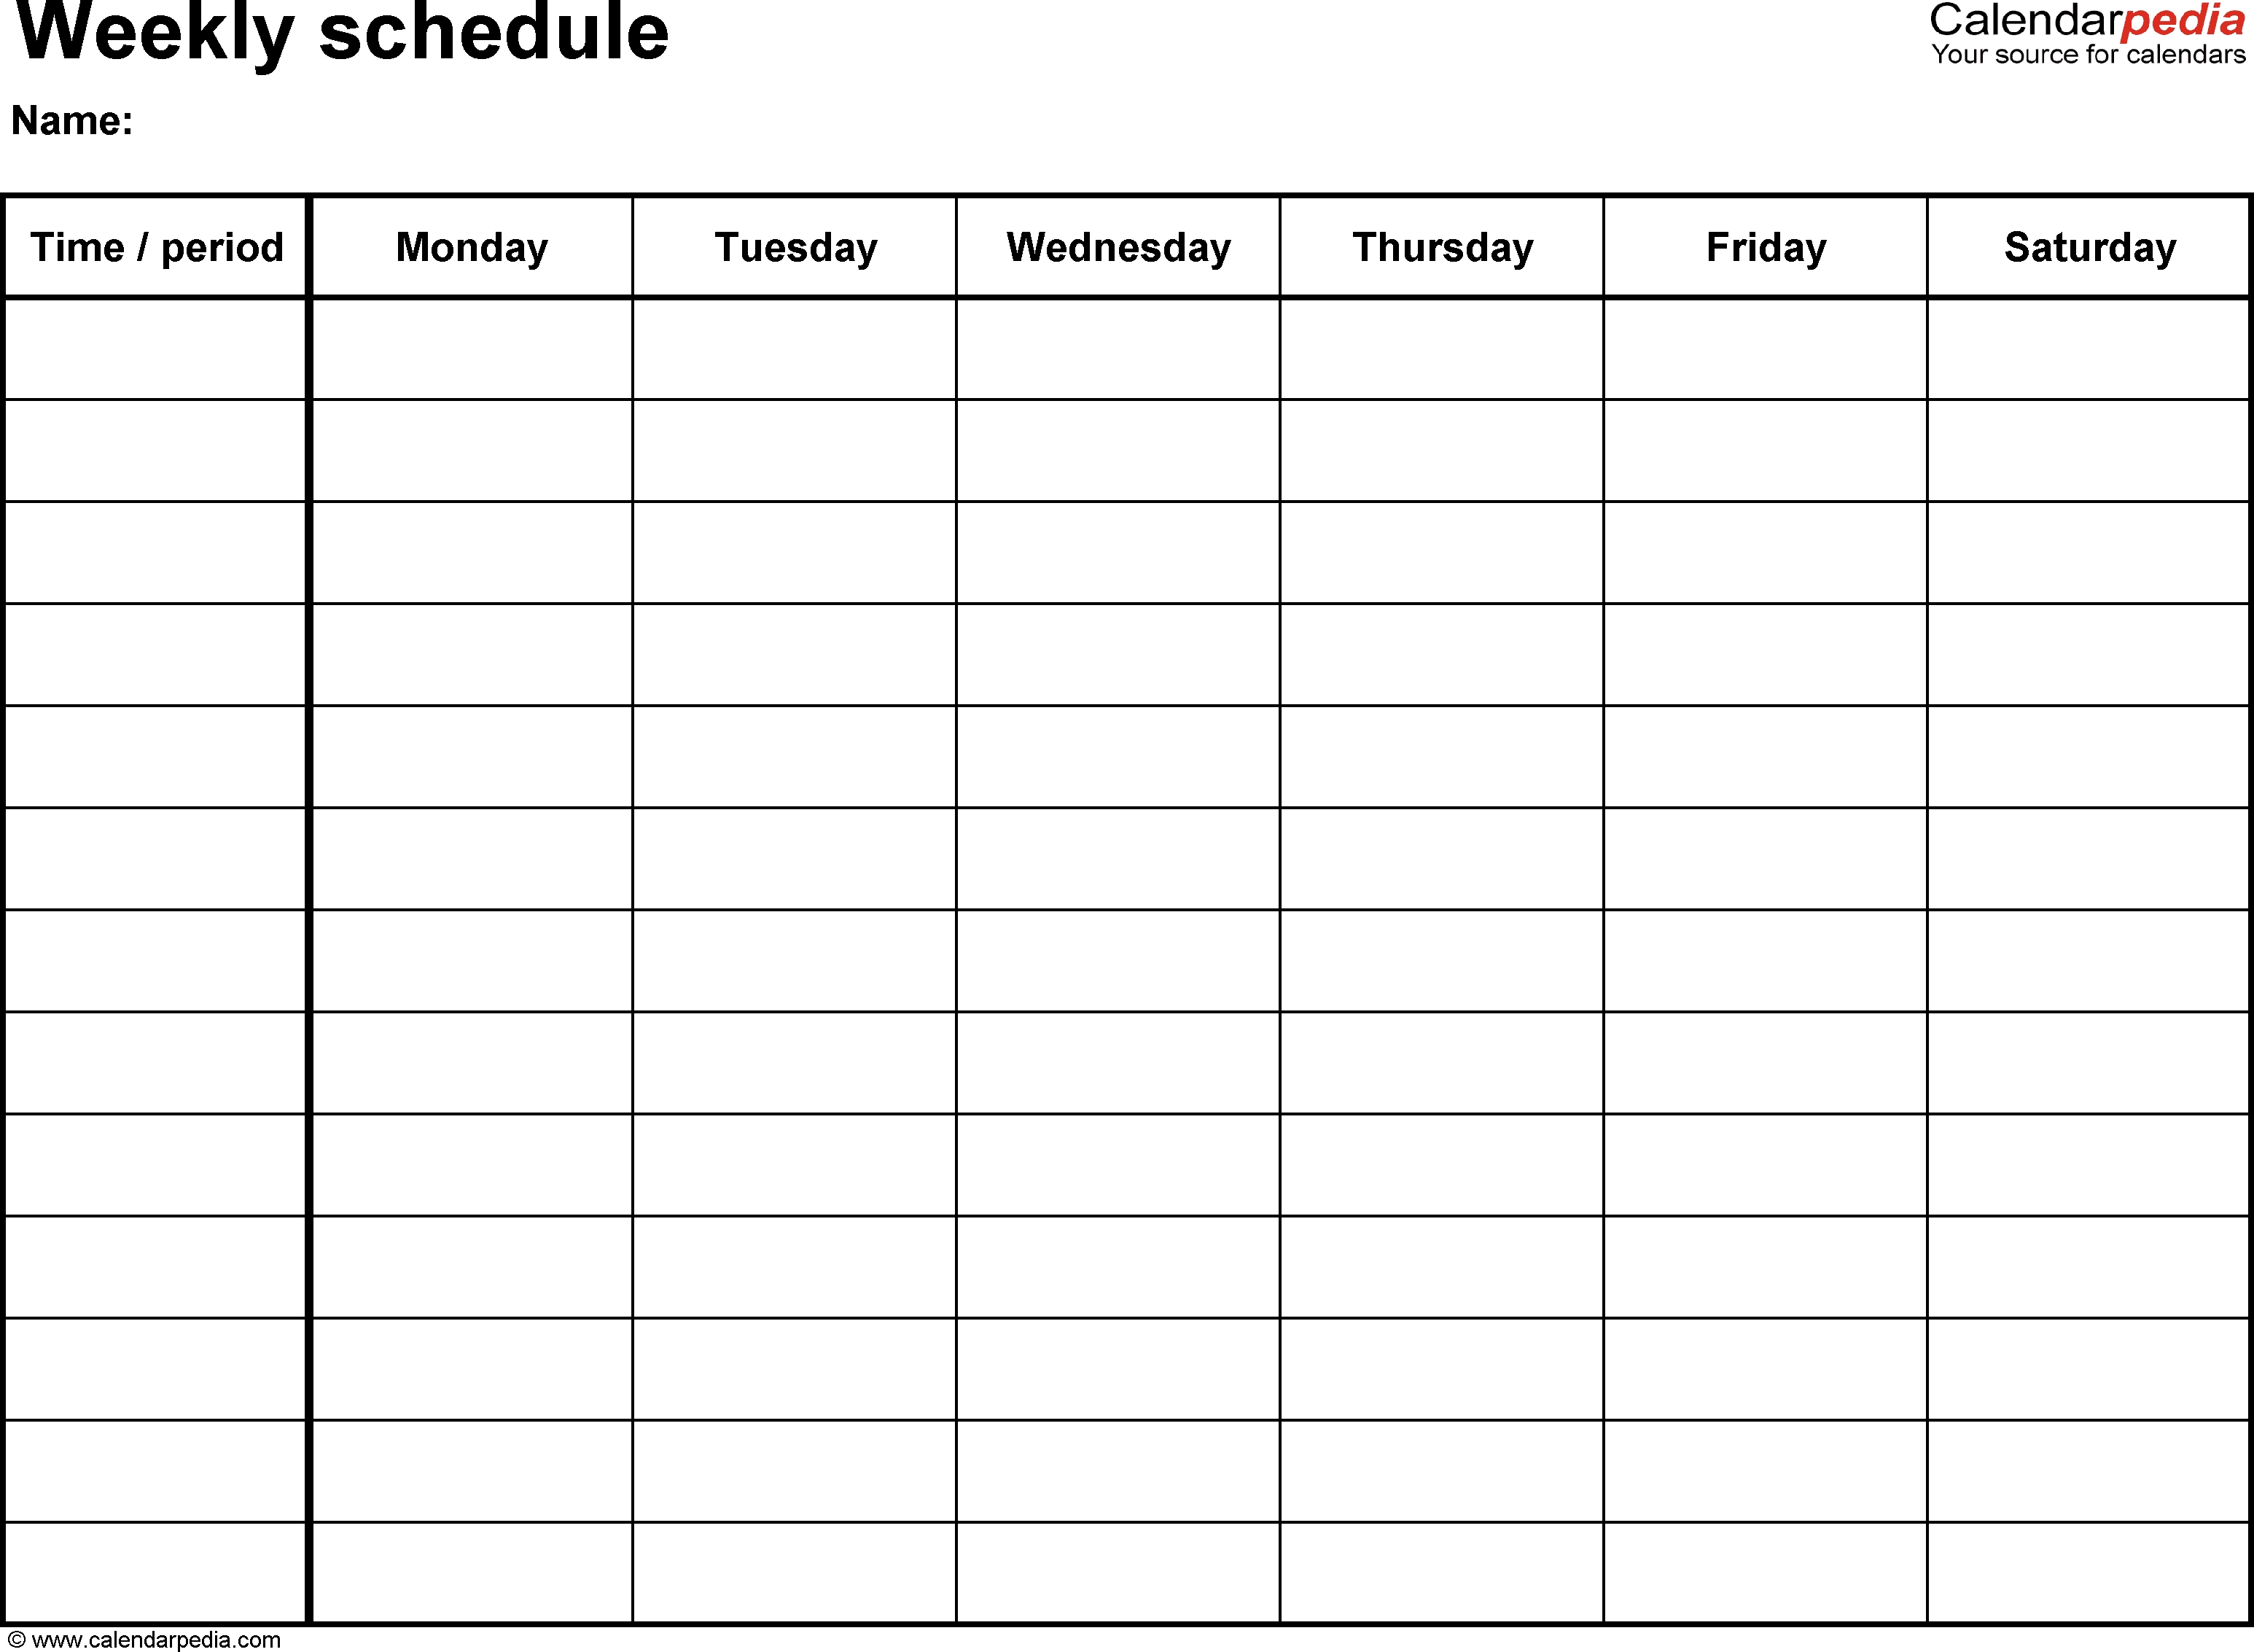 Free Weekly Schedule Templates For Excel - 18 Templates for Monday To Friday Timetable Excel